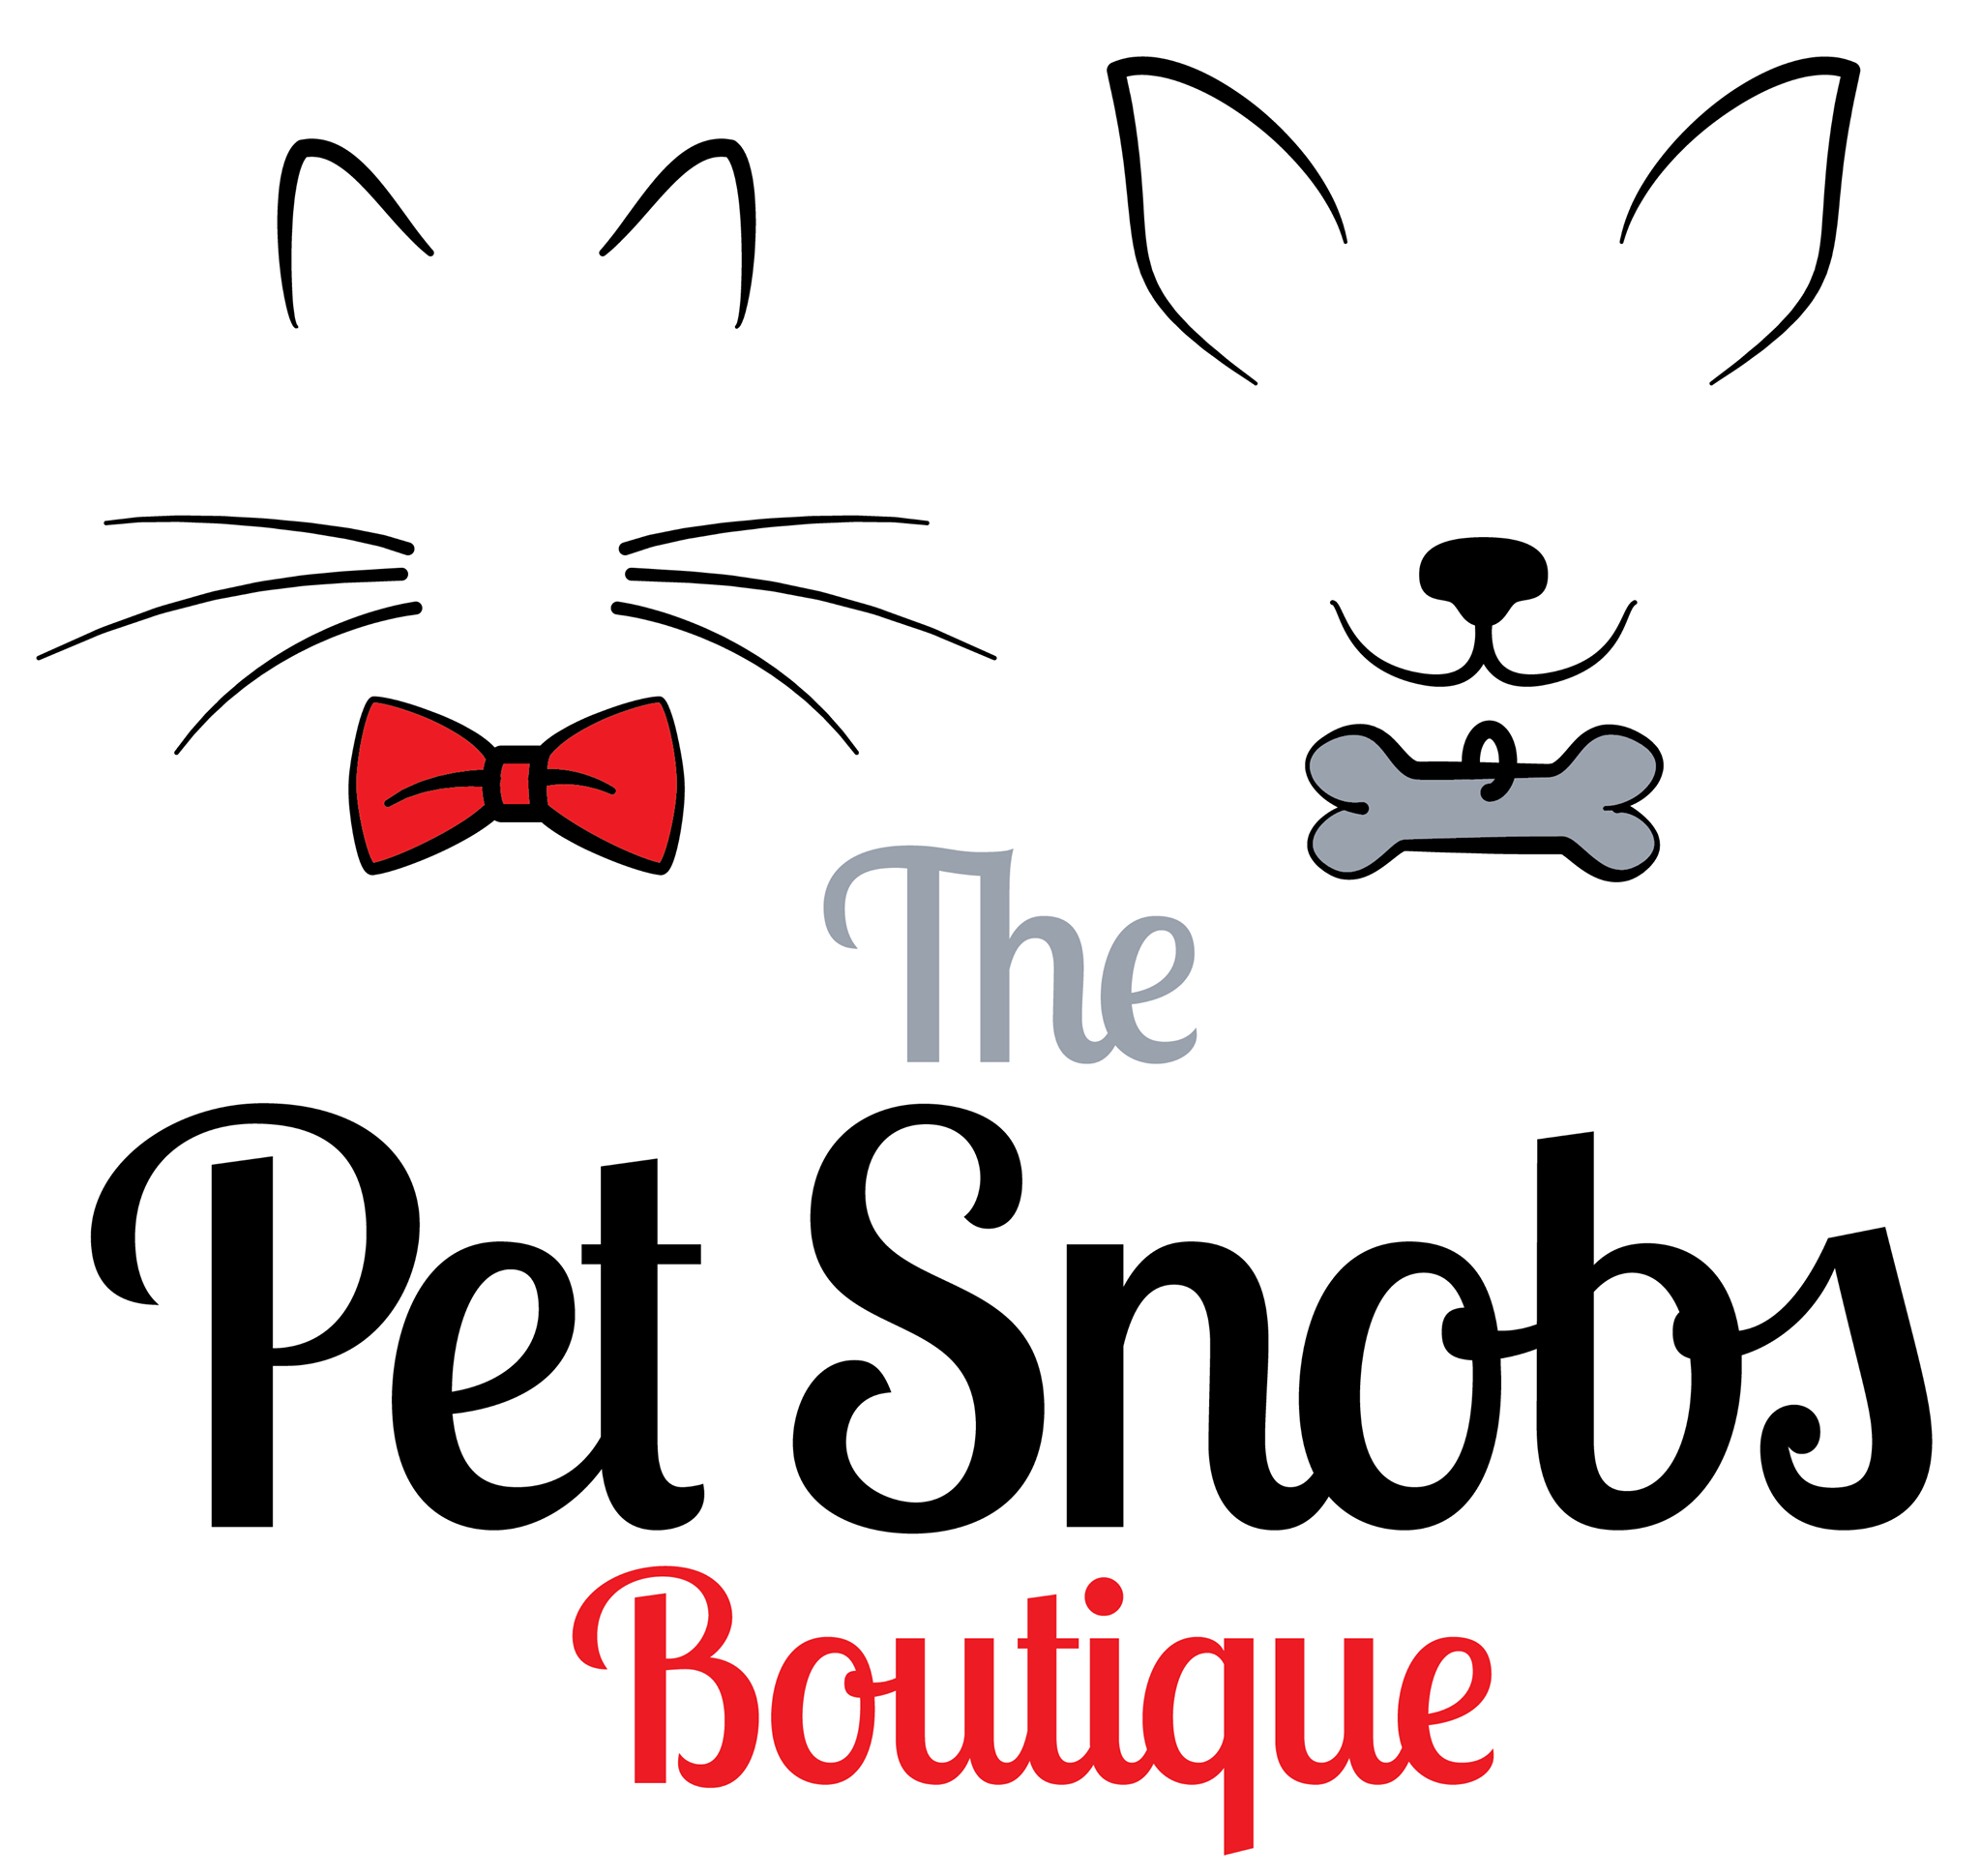 Company logo of The Pet Snobs Boutique